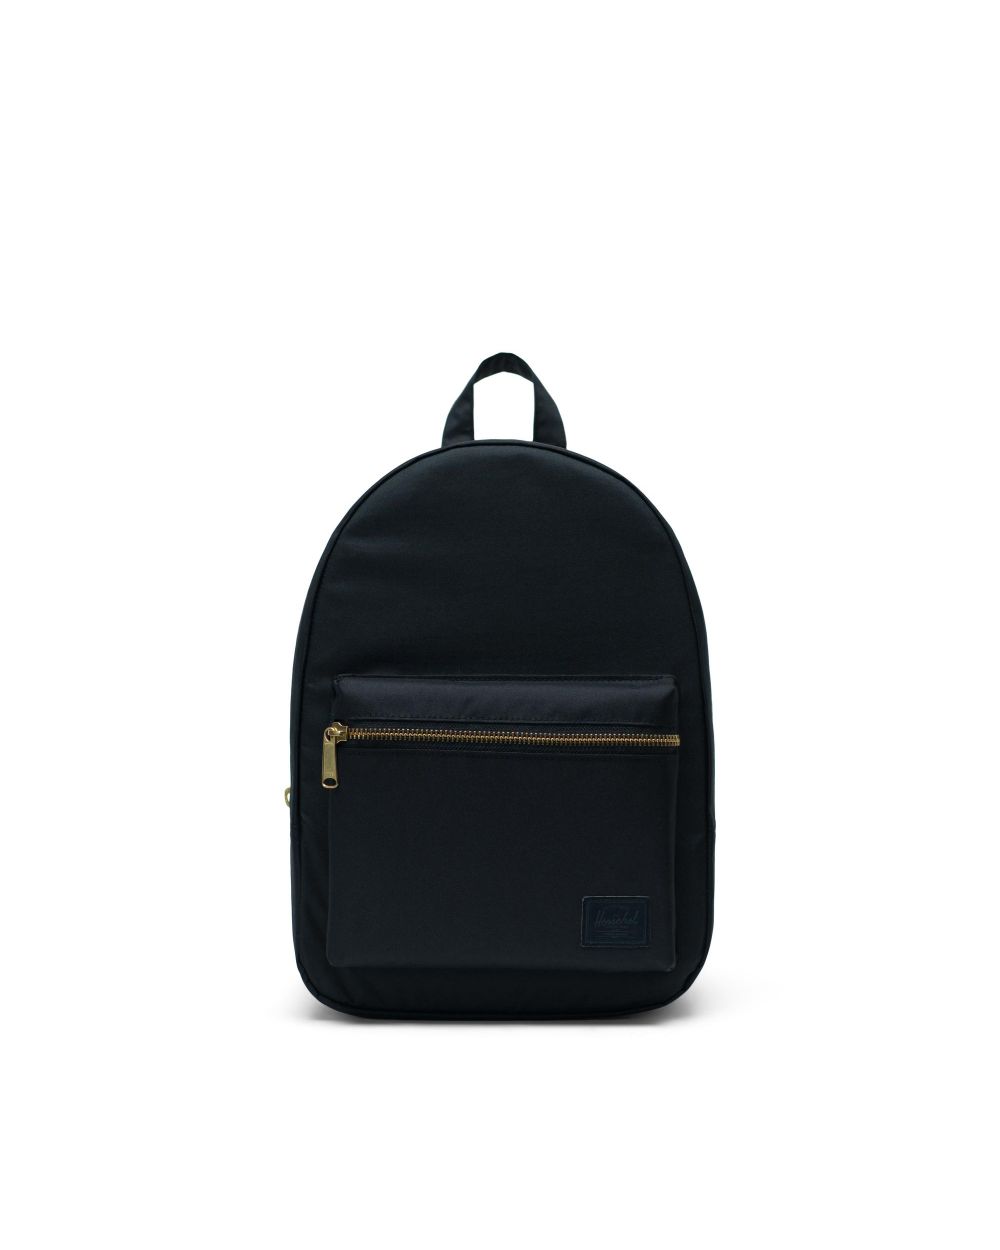 Grove Backpack Small | Herschel Supply Company